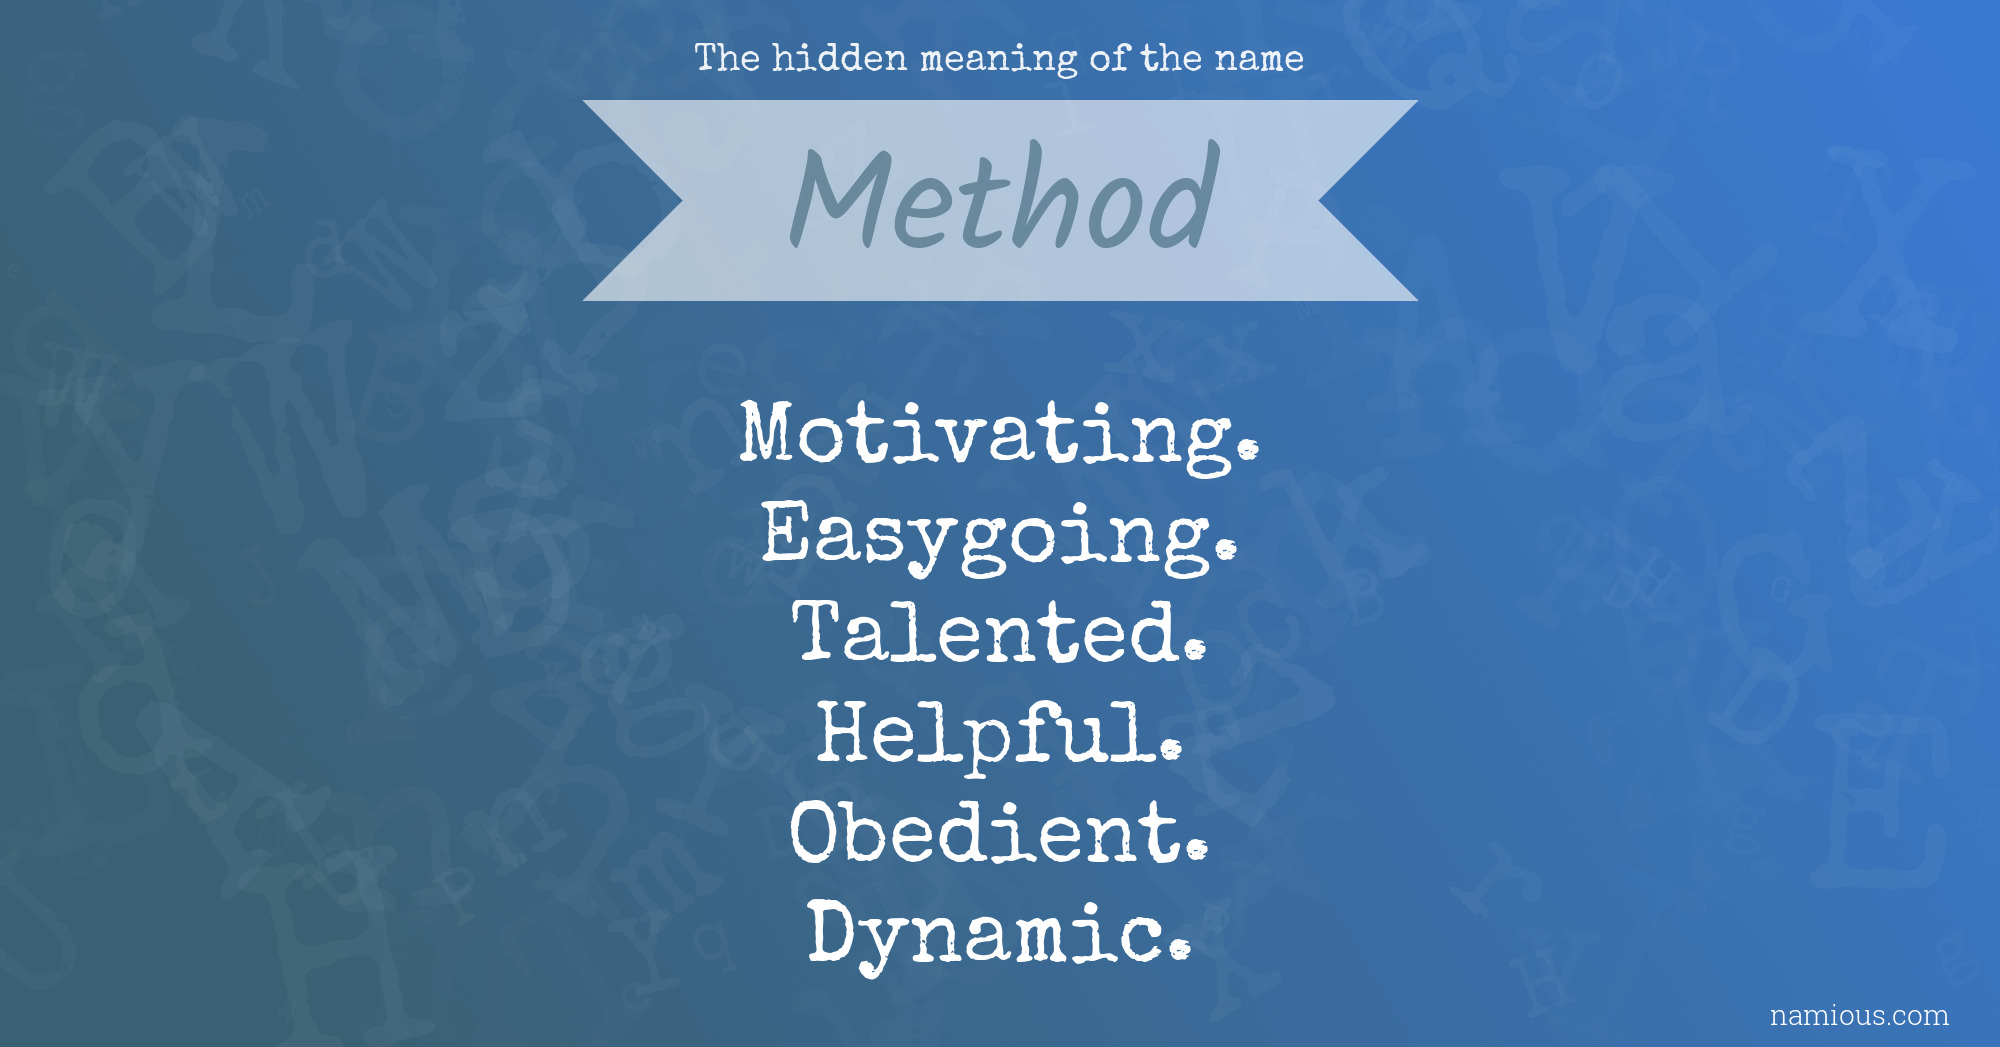 The hidden meaning of the name Method